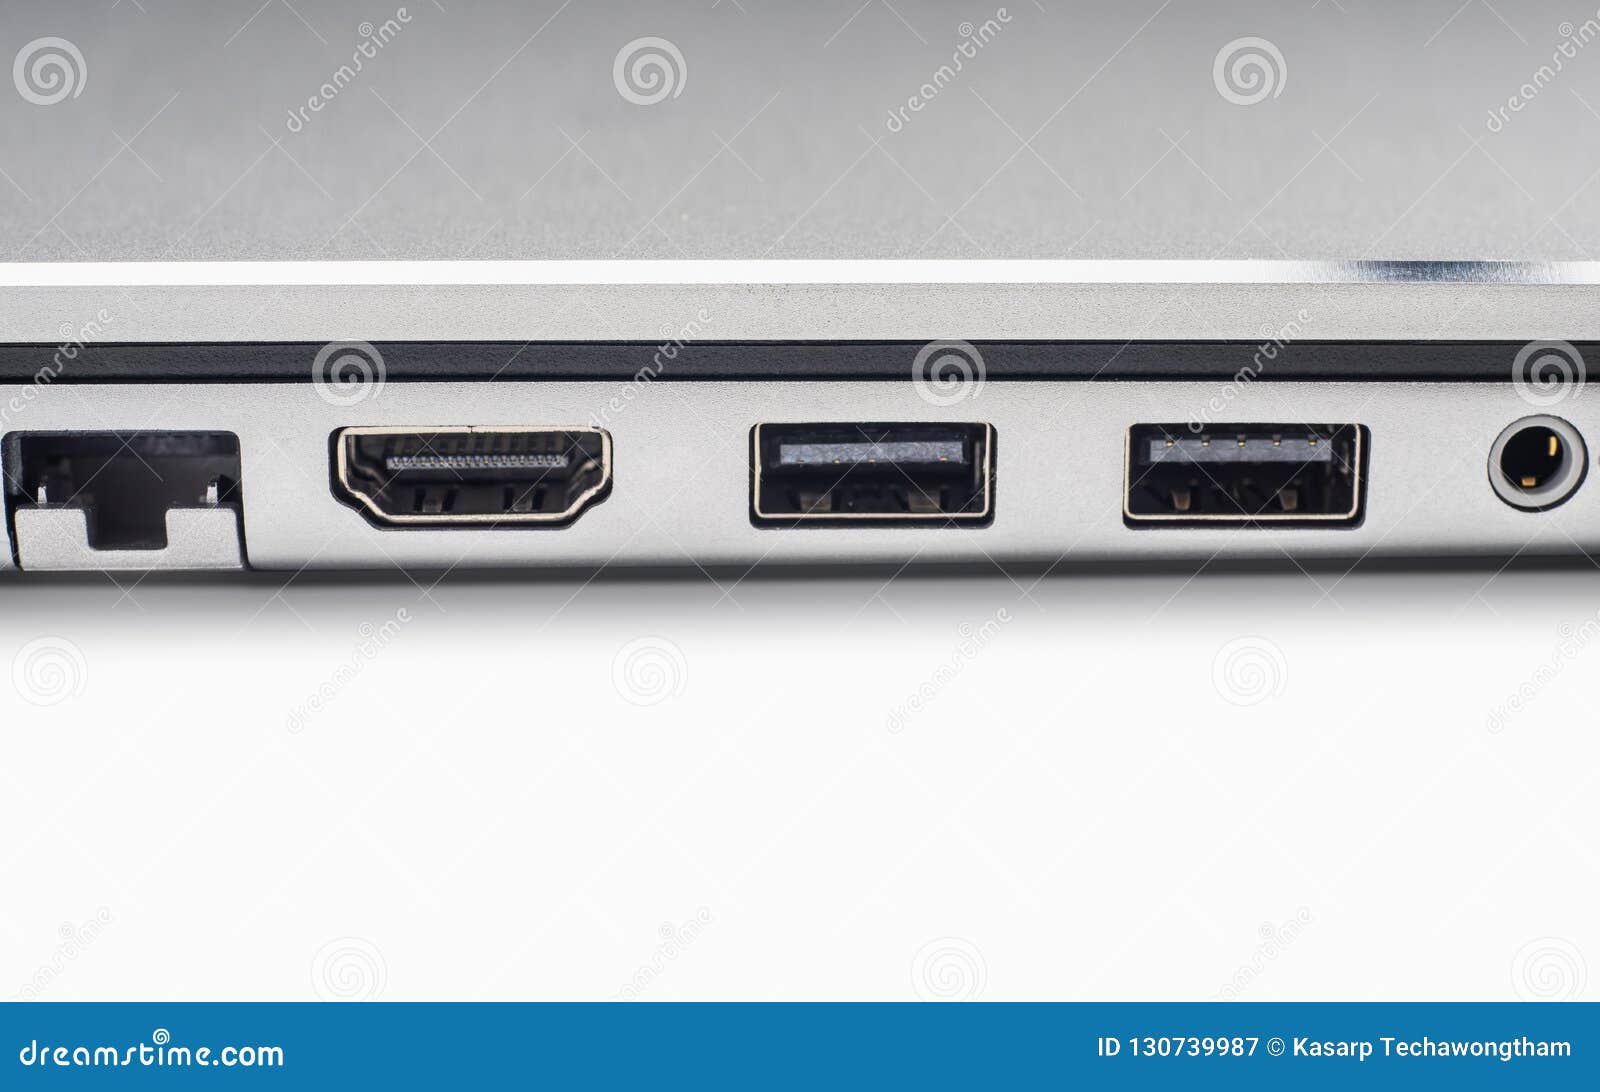 Vibrar Desviación Rápido LAN , Graphic , Firewire and Usb Ports of Laptop Computer on Wh Stock Image  - Image of close, firewire: 130739987